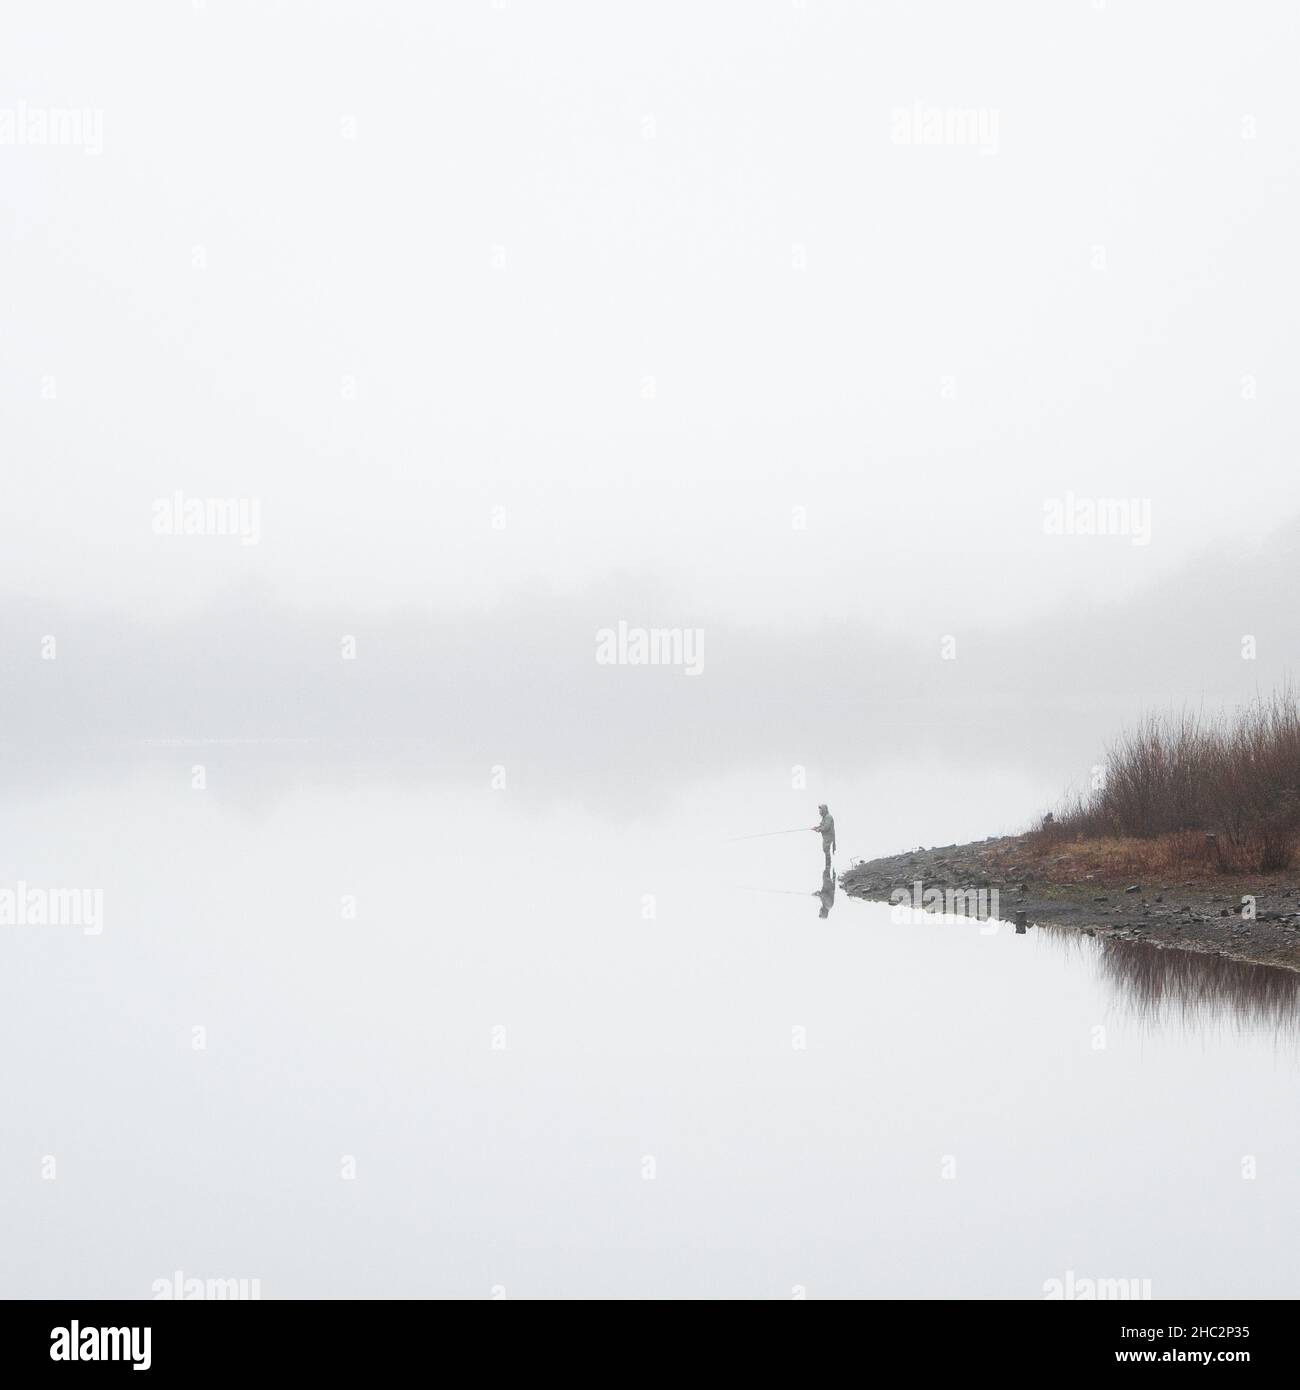 A lonely angler is captured within the empty landscape of Fewston Reservoir on a misty December morning, surrounded by peaceful emptiness. Stock Photo